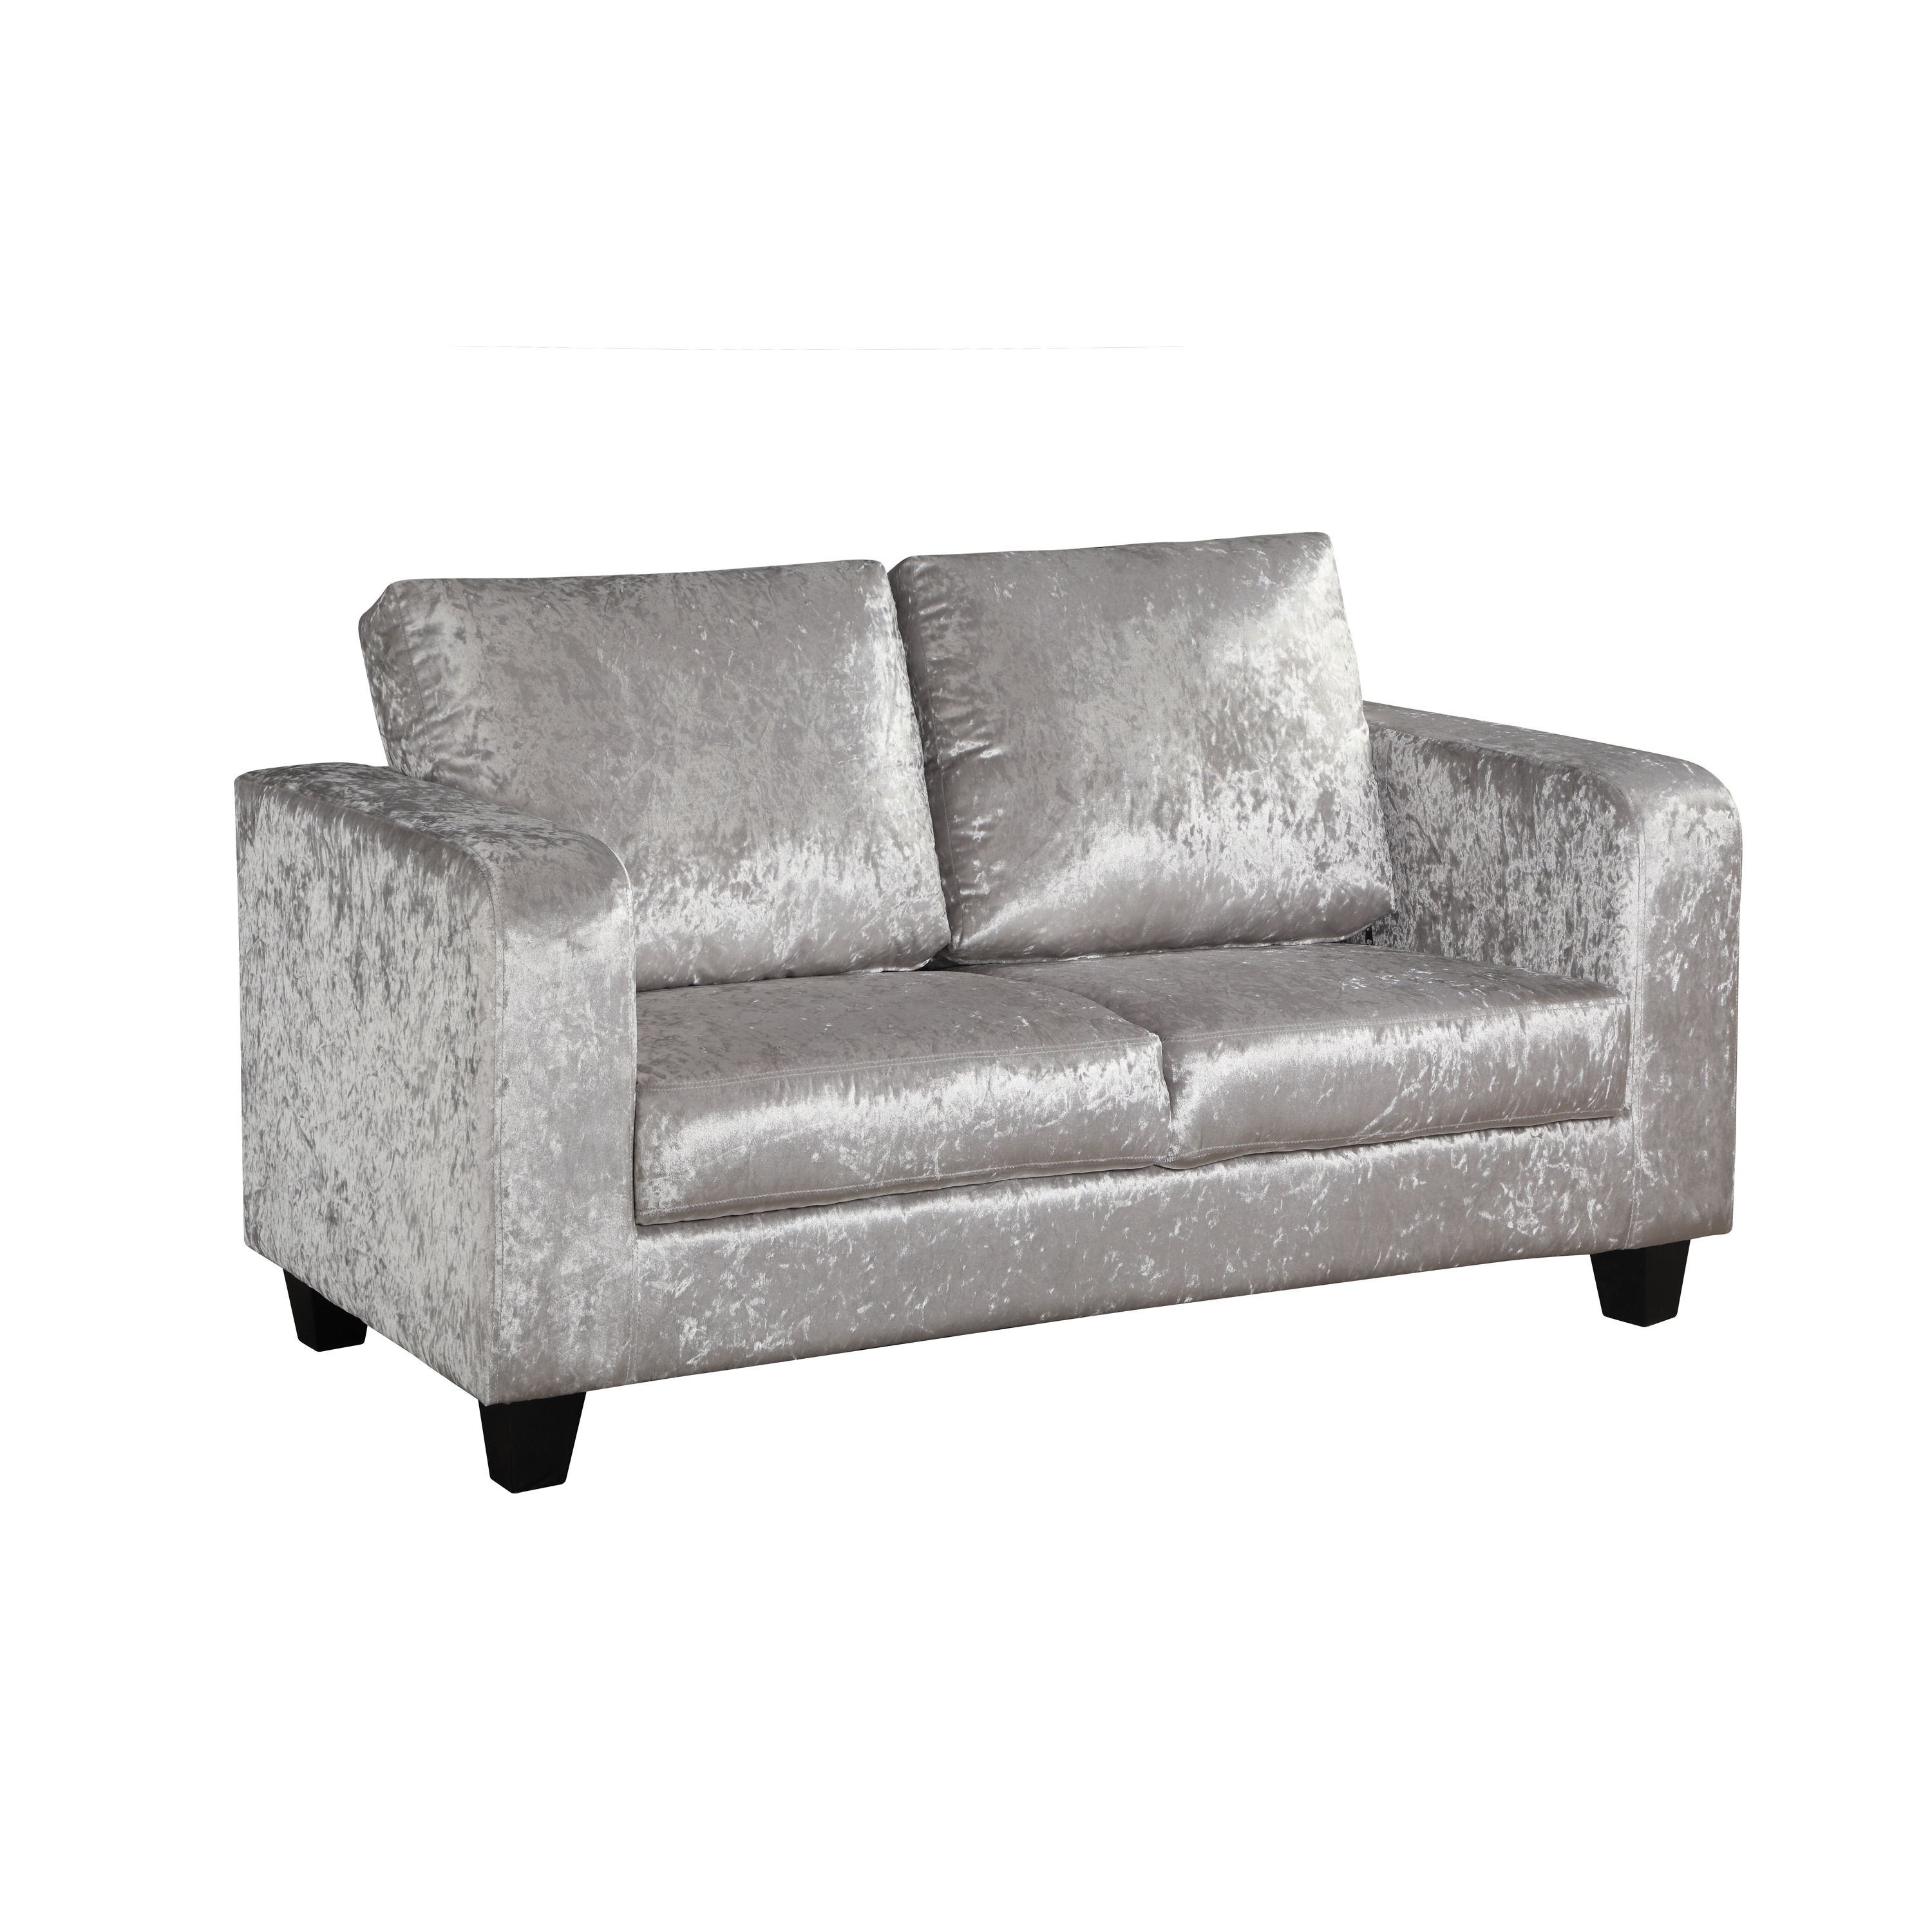 LPD Sofa In A Box Silver Crushed Velvet - image 1